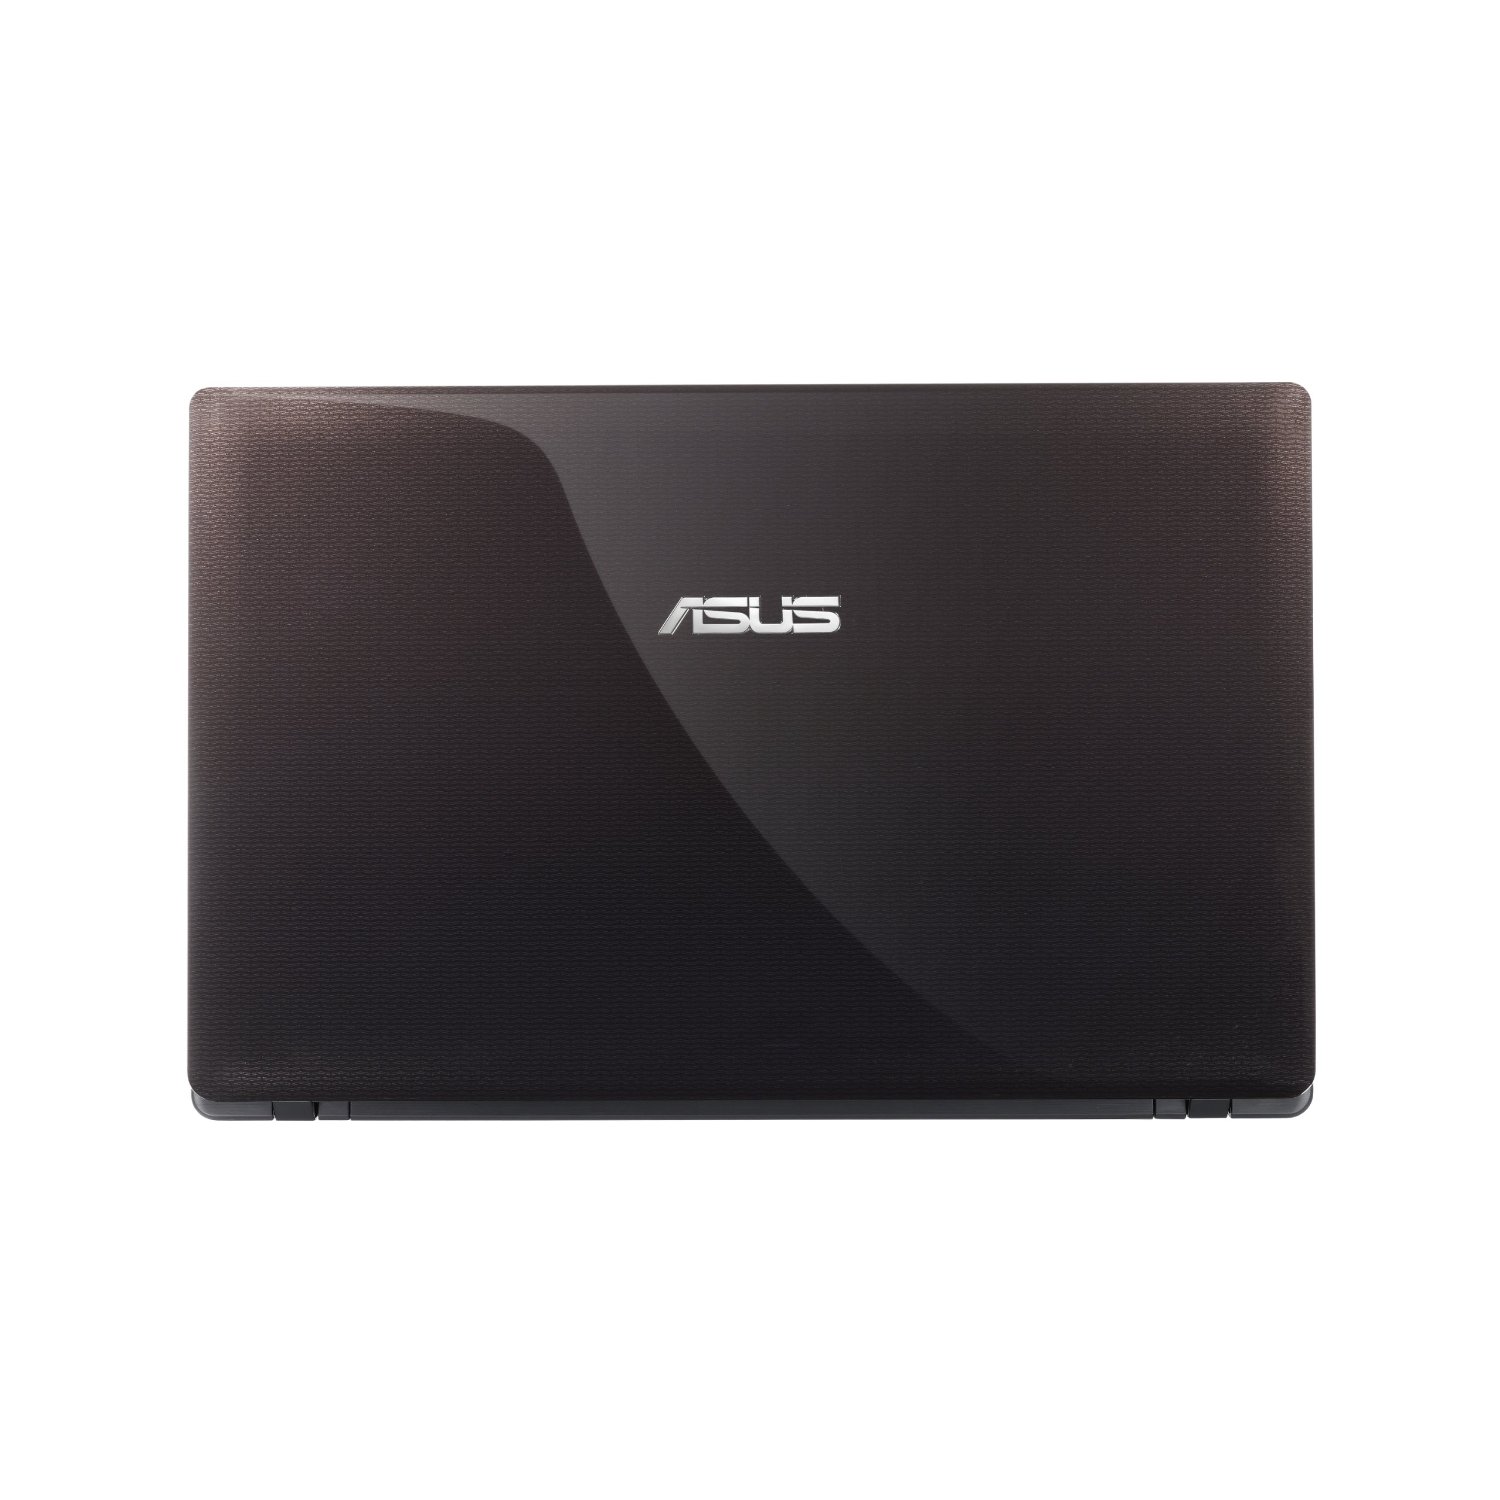 http://thetechjournal.com/wp-content/uploads/images/1203/1332652603-asus-a53ues01-156inch-laptop-6.jpg